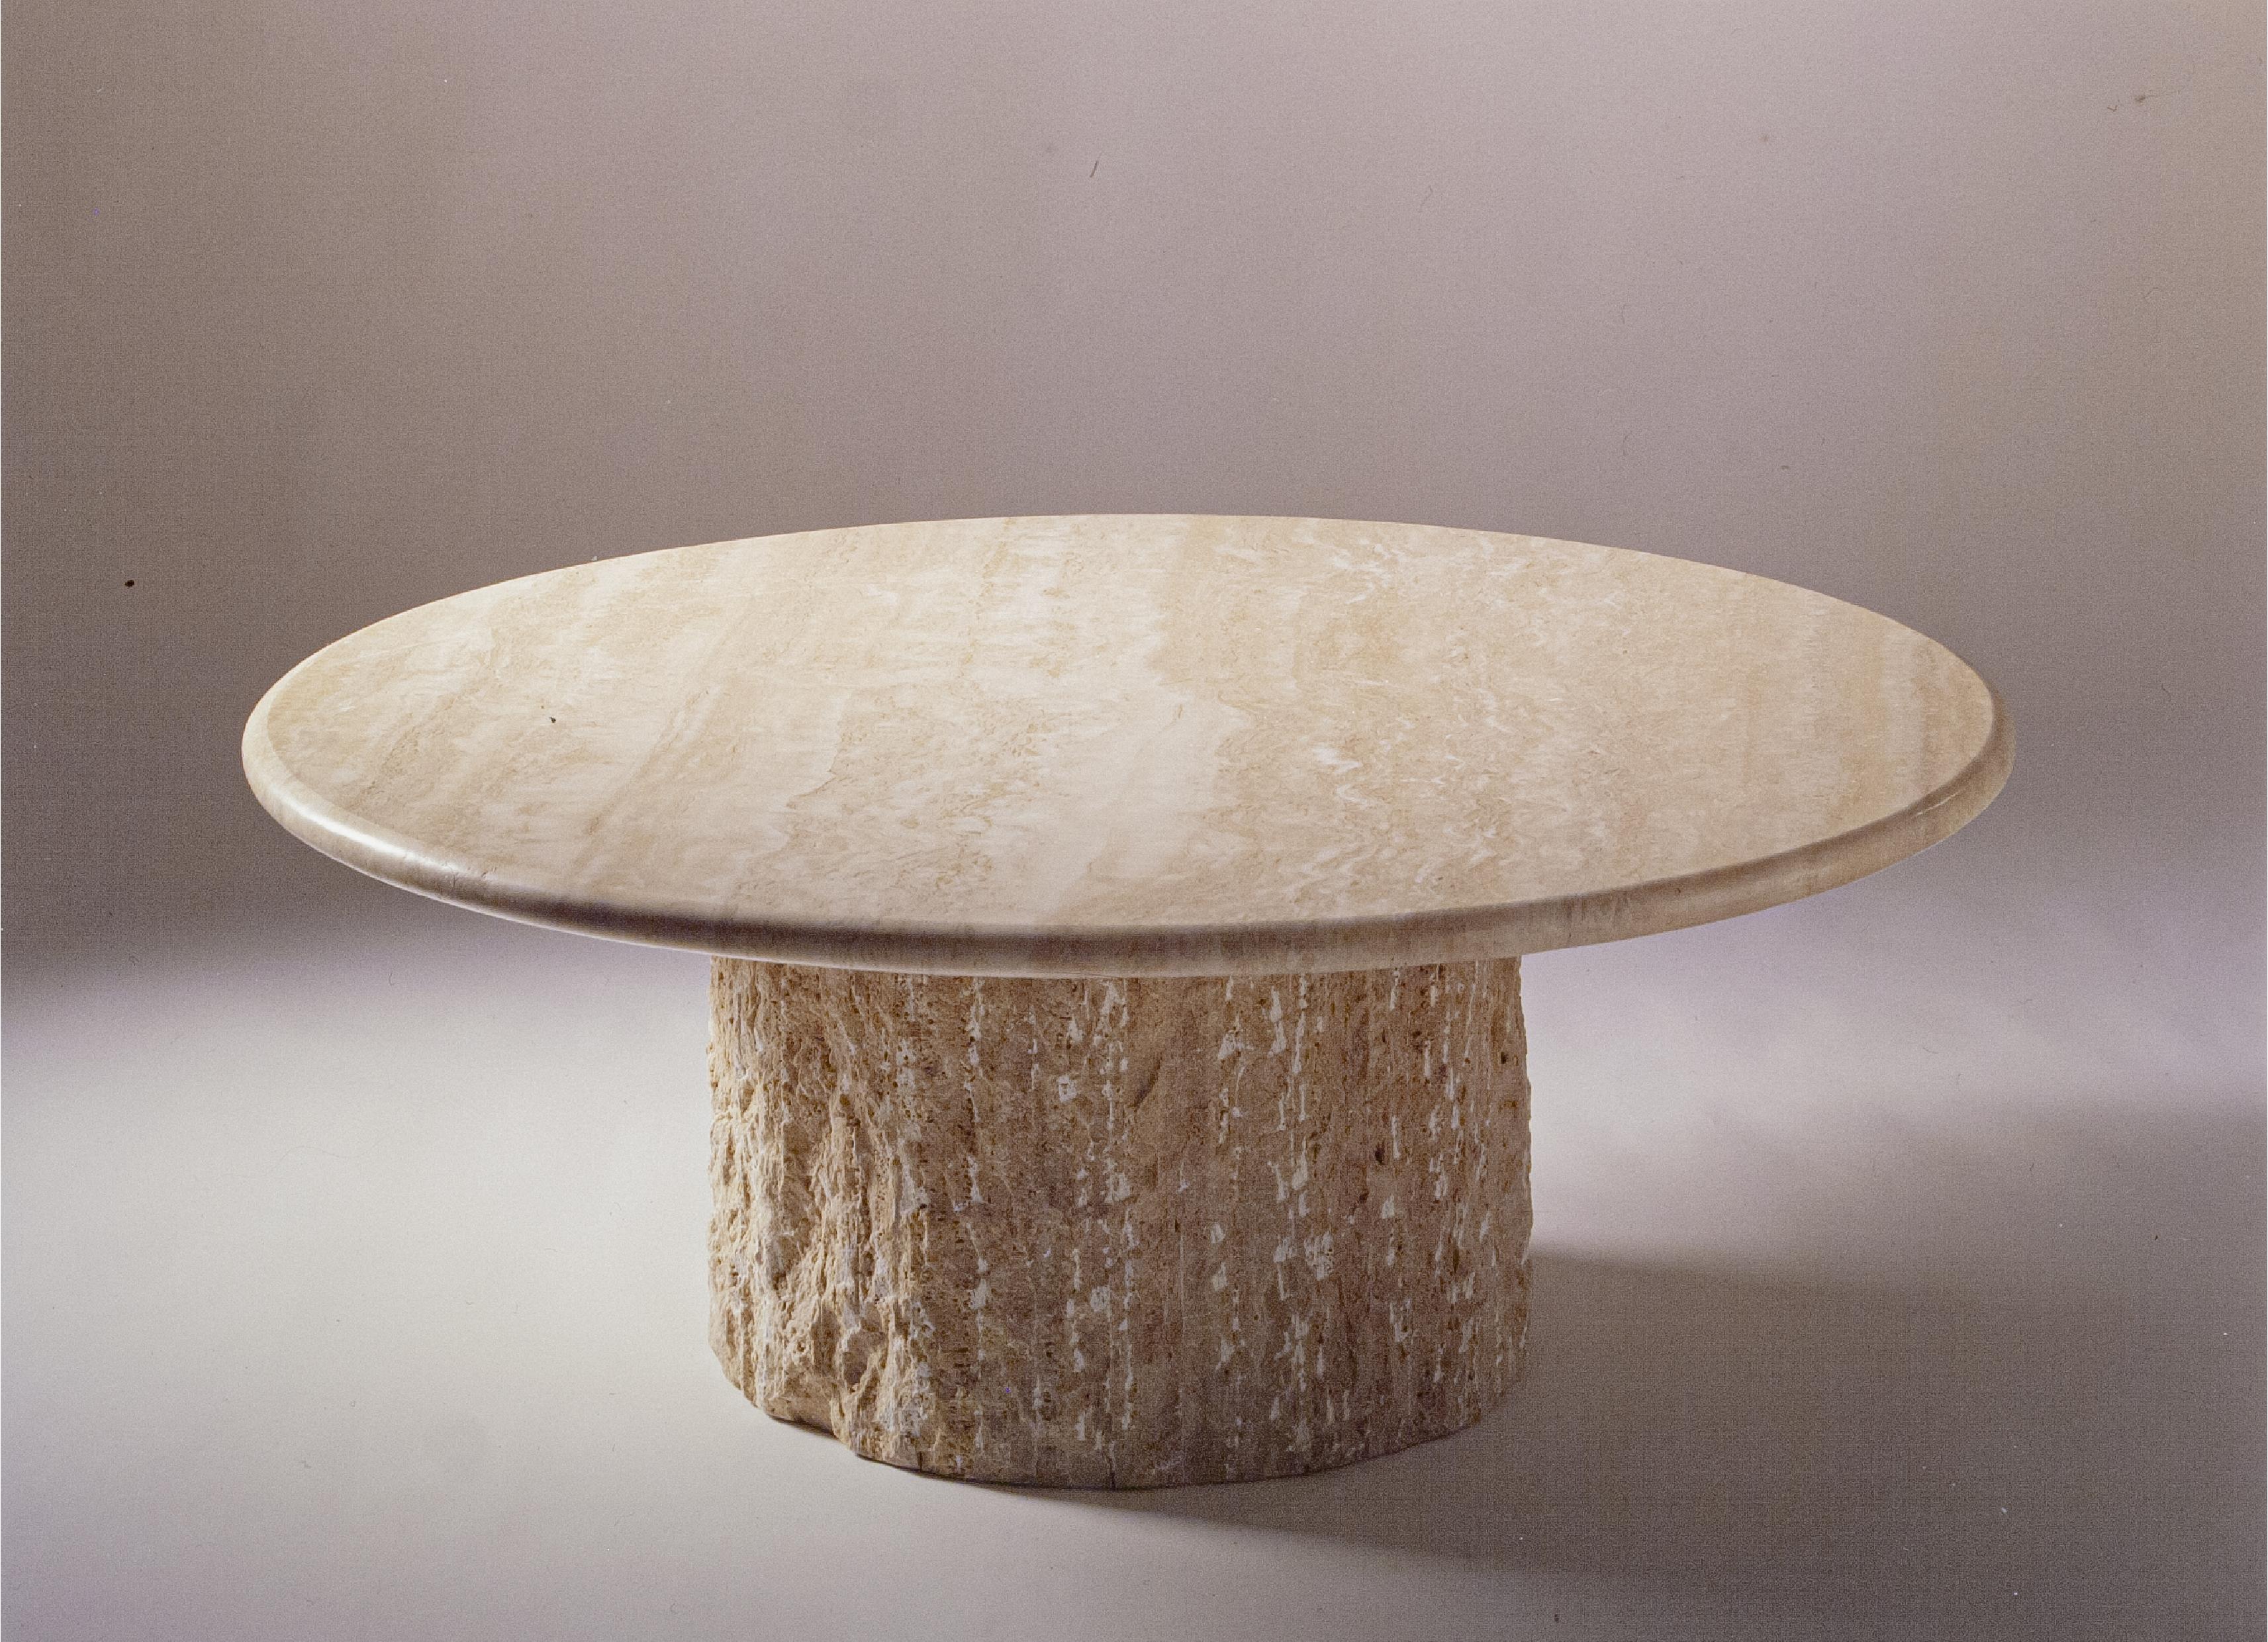 Brushed Balta Travertine Marble Midcentury Coffee Table Contemporary Spain in Stock